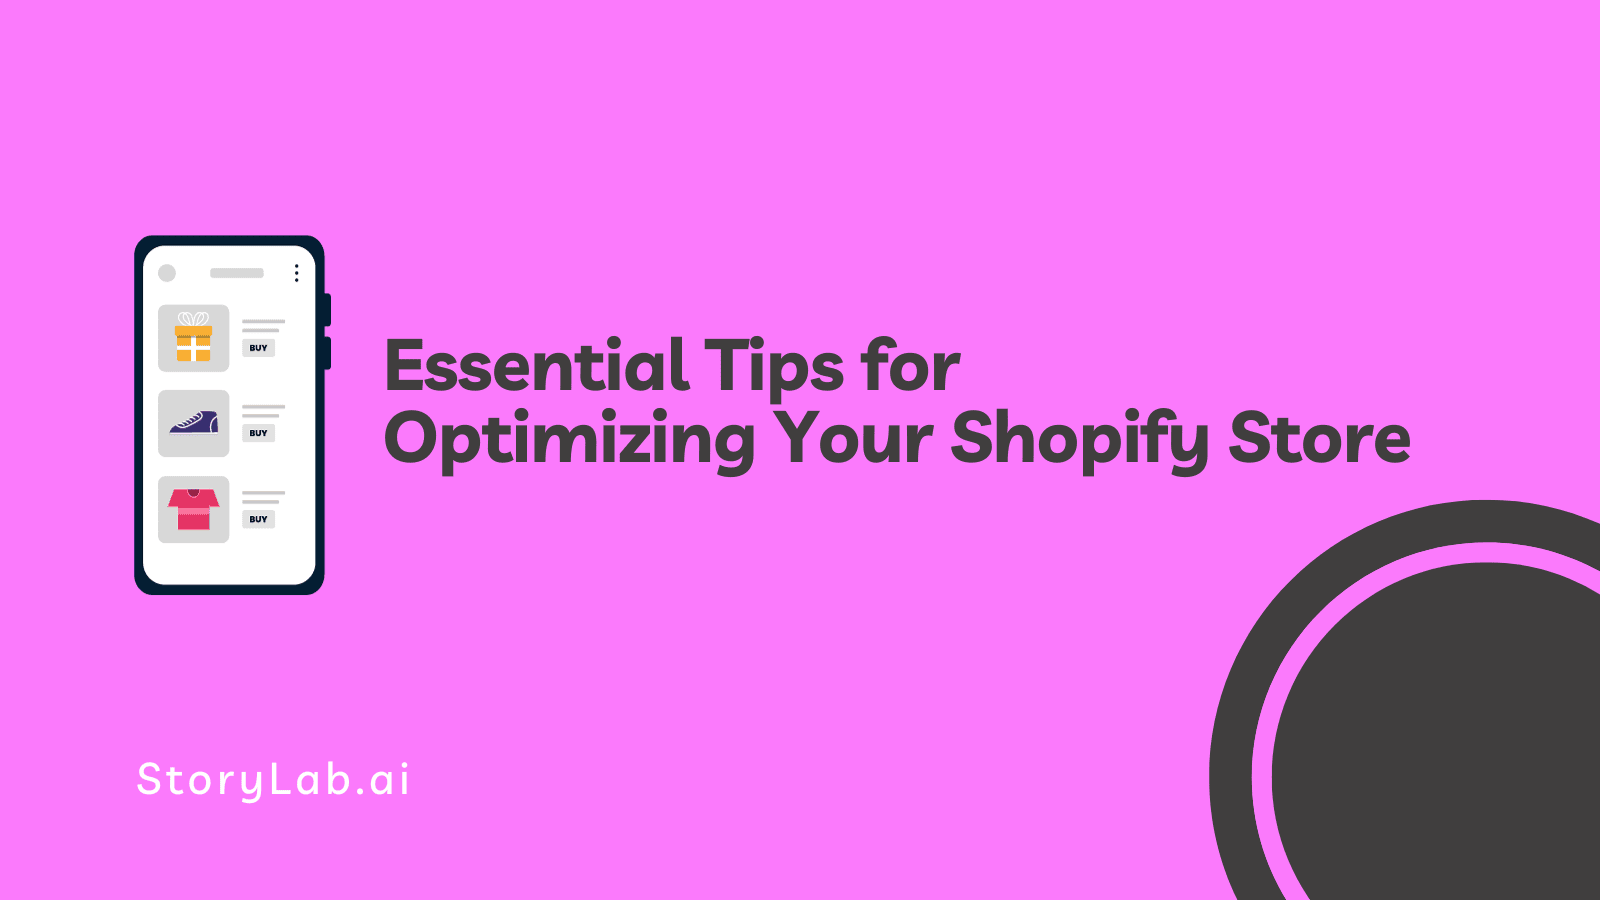 Essential Tips for Optimizing Your Shopify Store